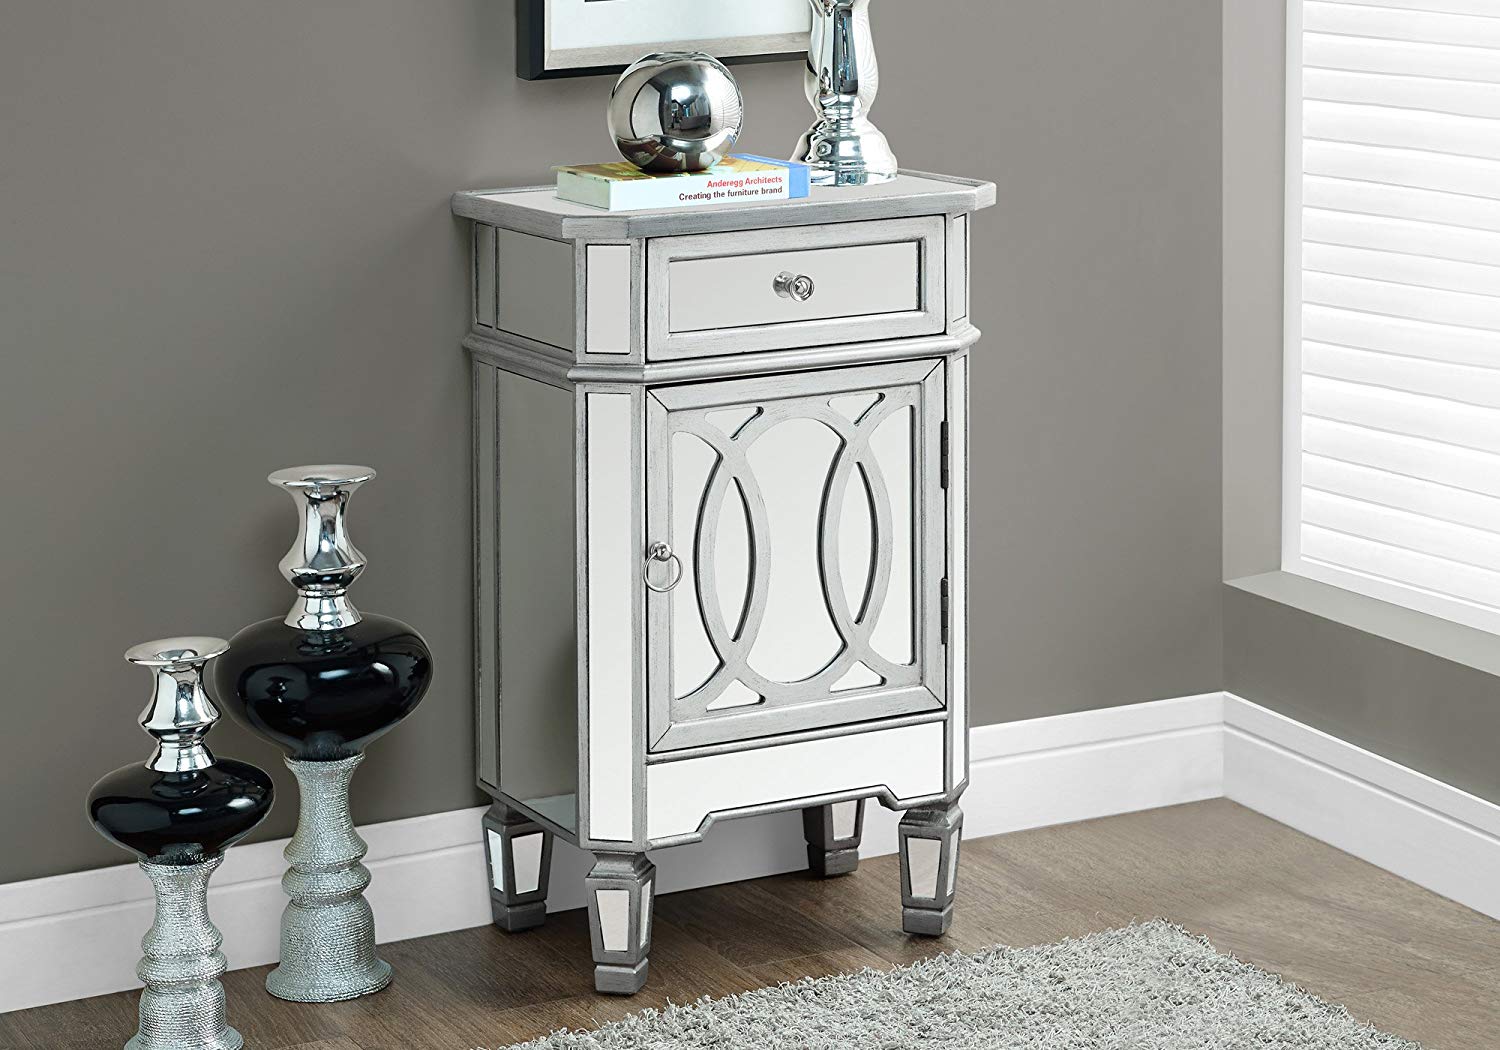 monarch specialties mirror accent table mirage mirrored silver kitchen dining oriental style lamps furniture edmonton inch legs chandelier nightstand lamp console bathroom clock